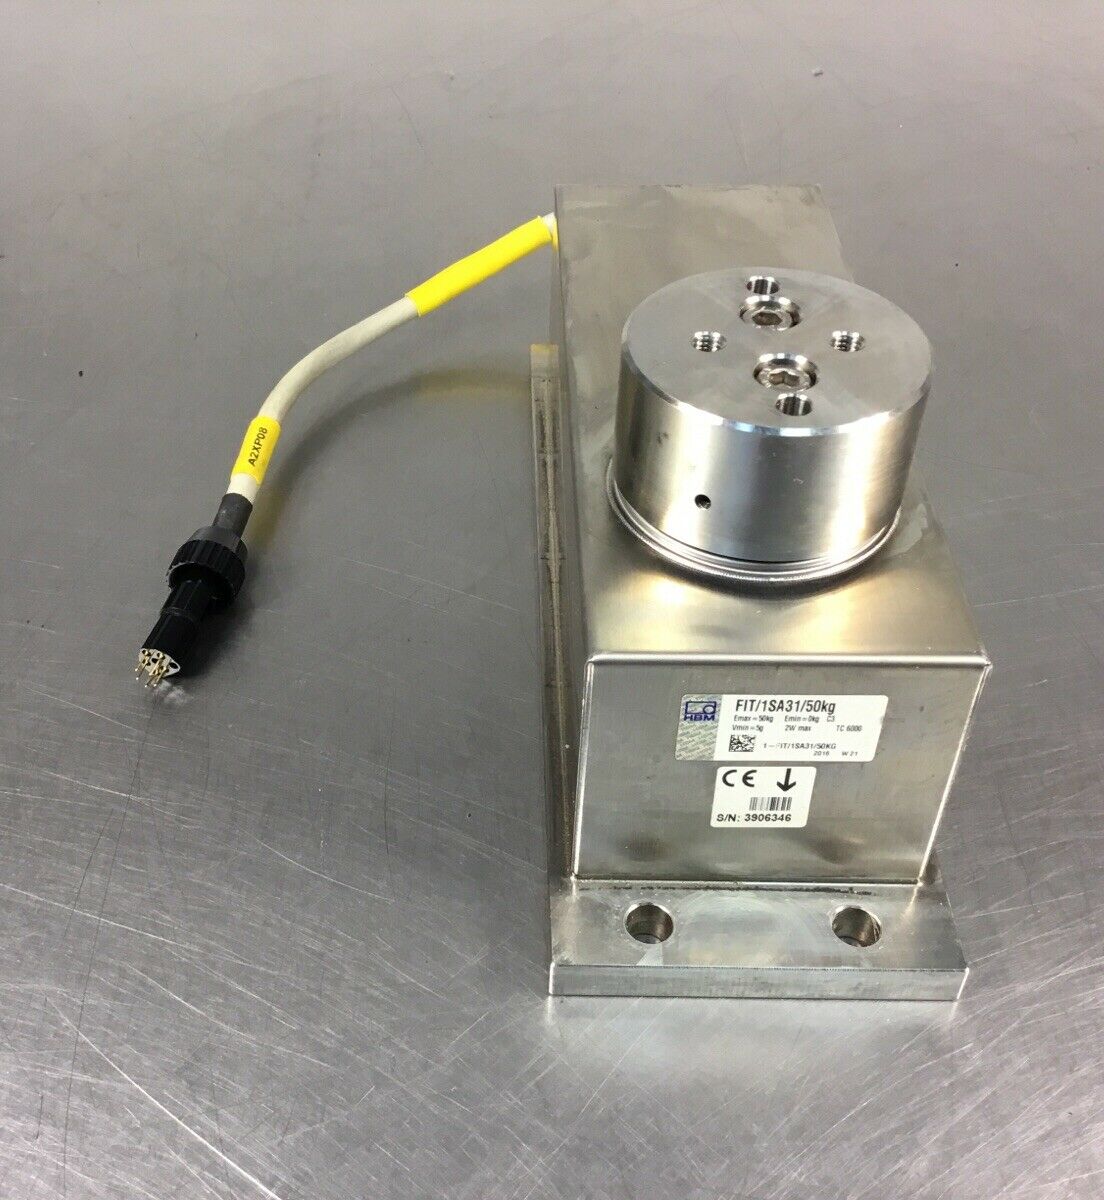 HBM FIT/1SA31/50KG Load Cell 50kg 2W Max    6C